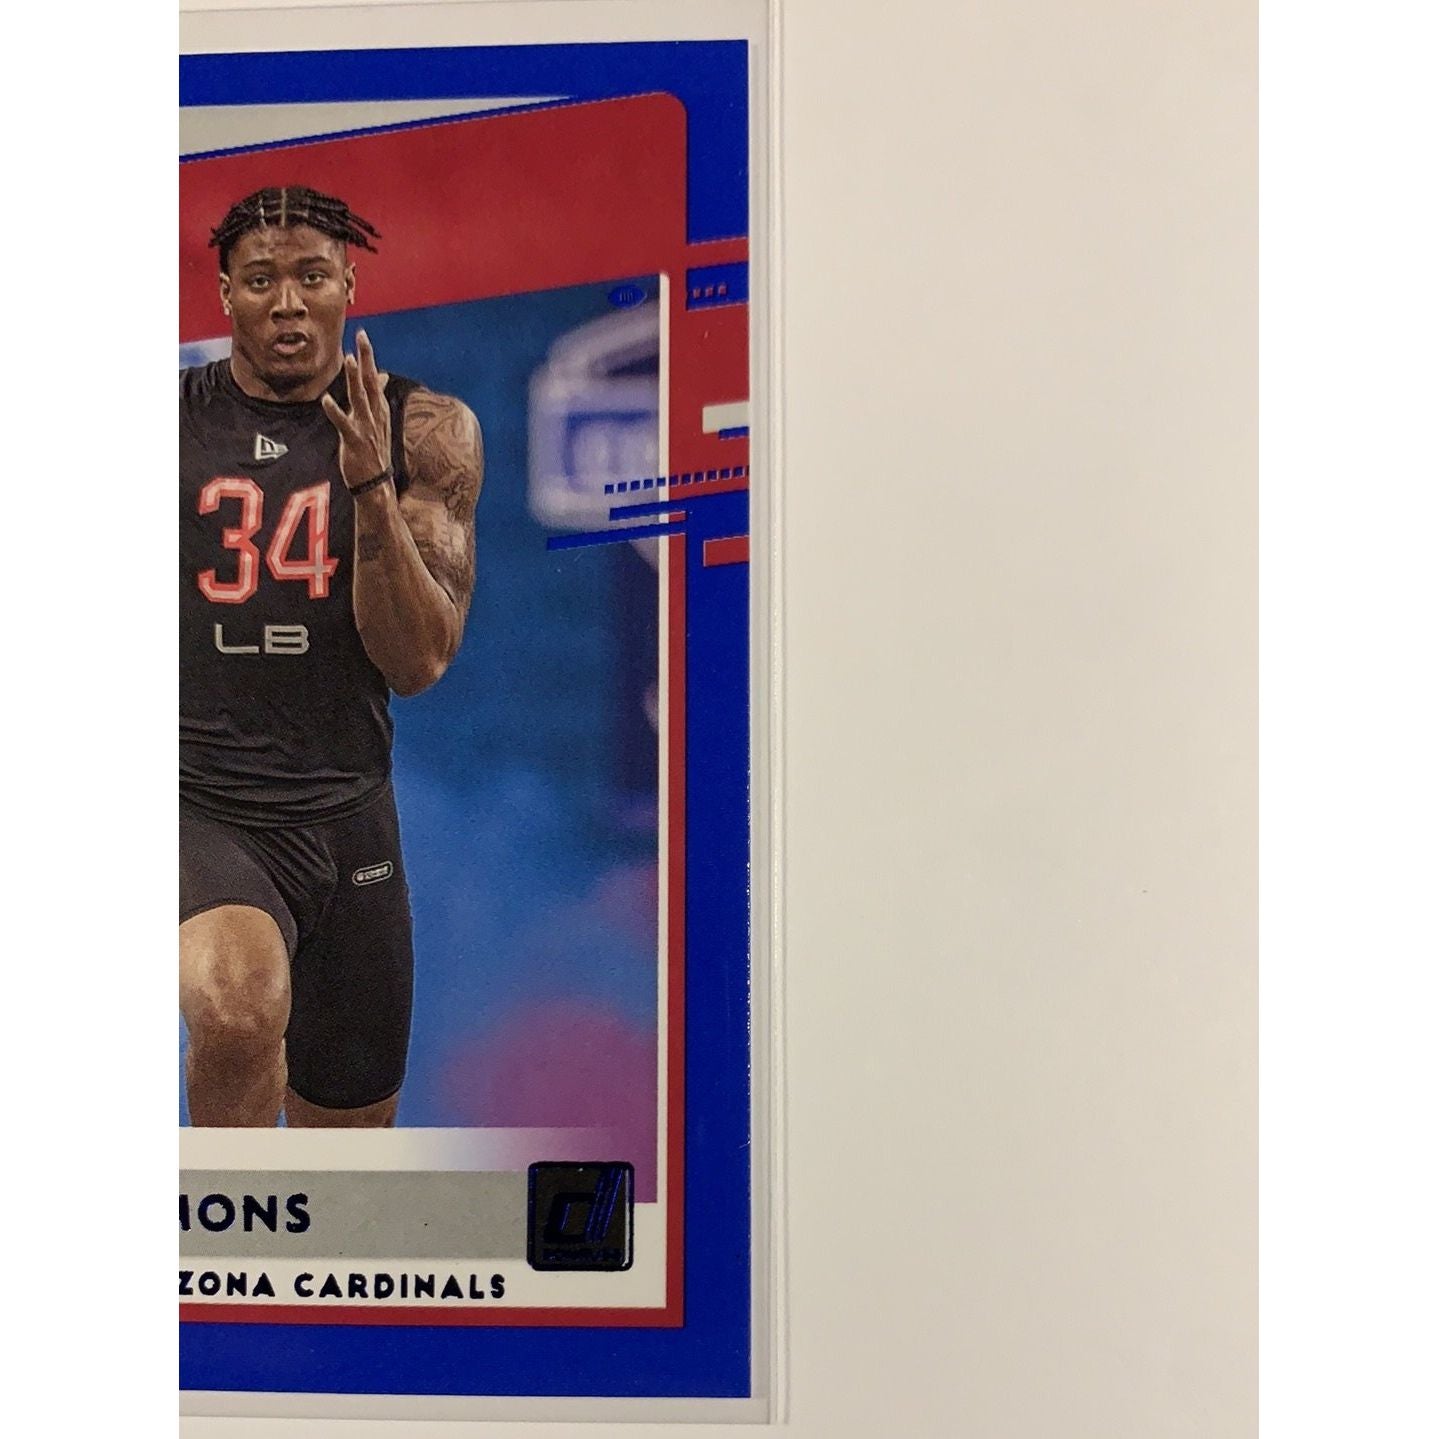  2020 Donruss Isaiah Simmons Blue Press Proof Rated Rookie  Local Legends Cards & Collectibles